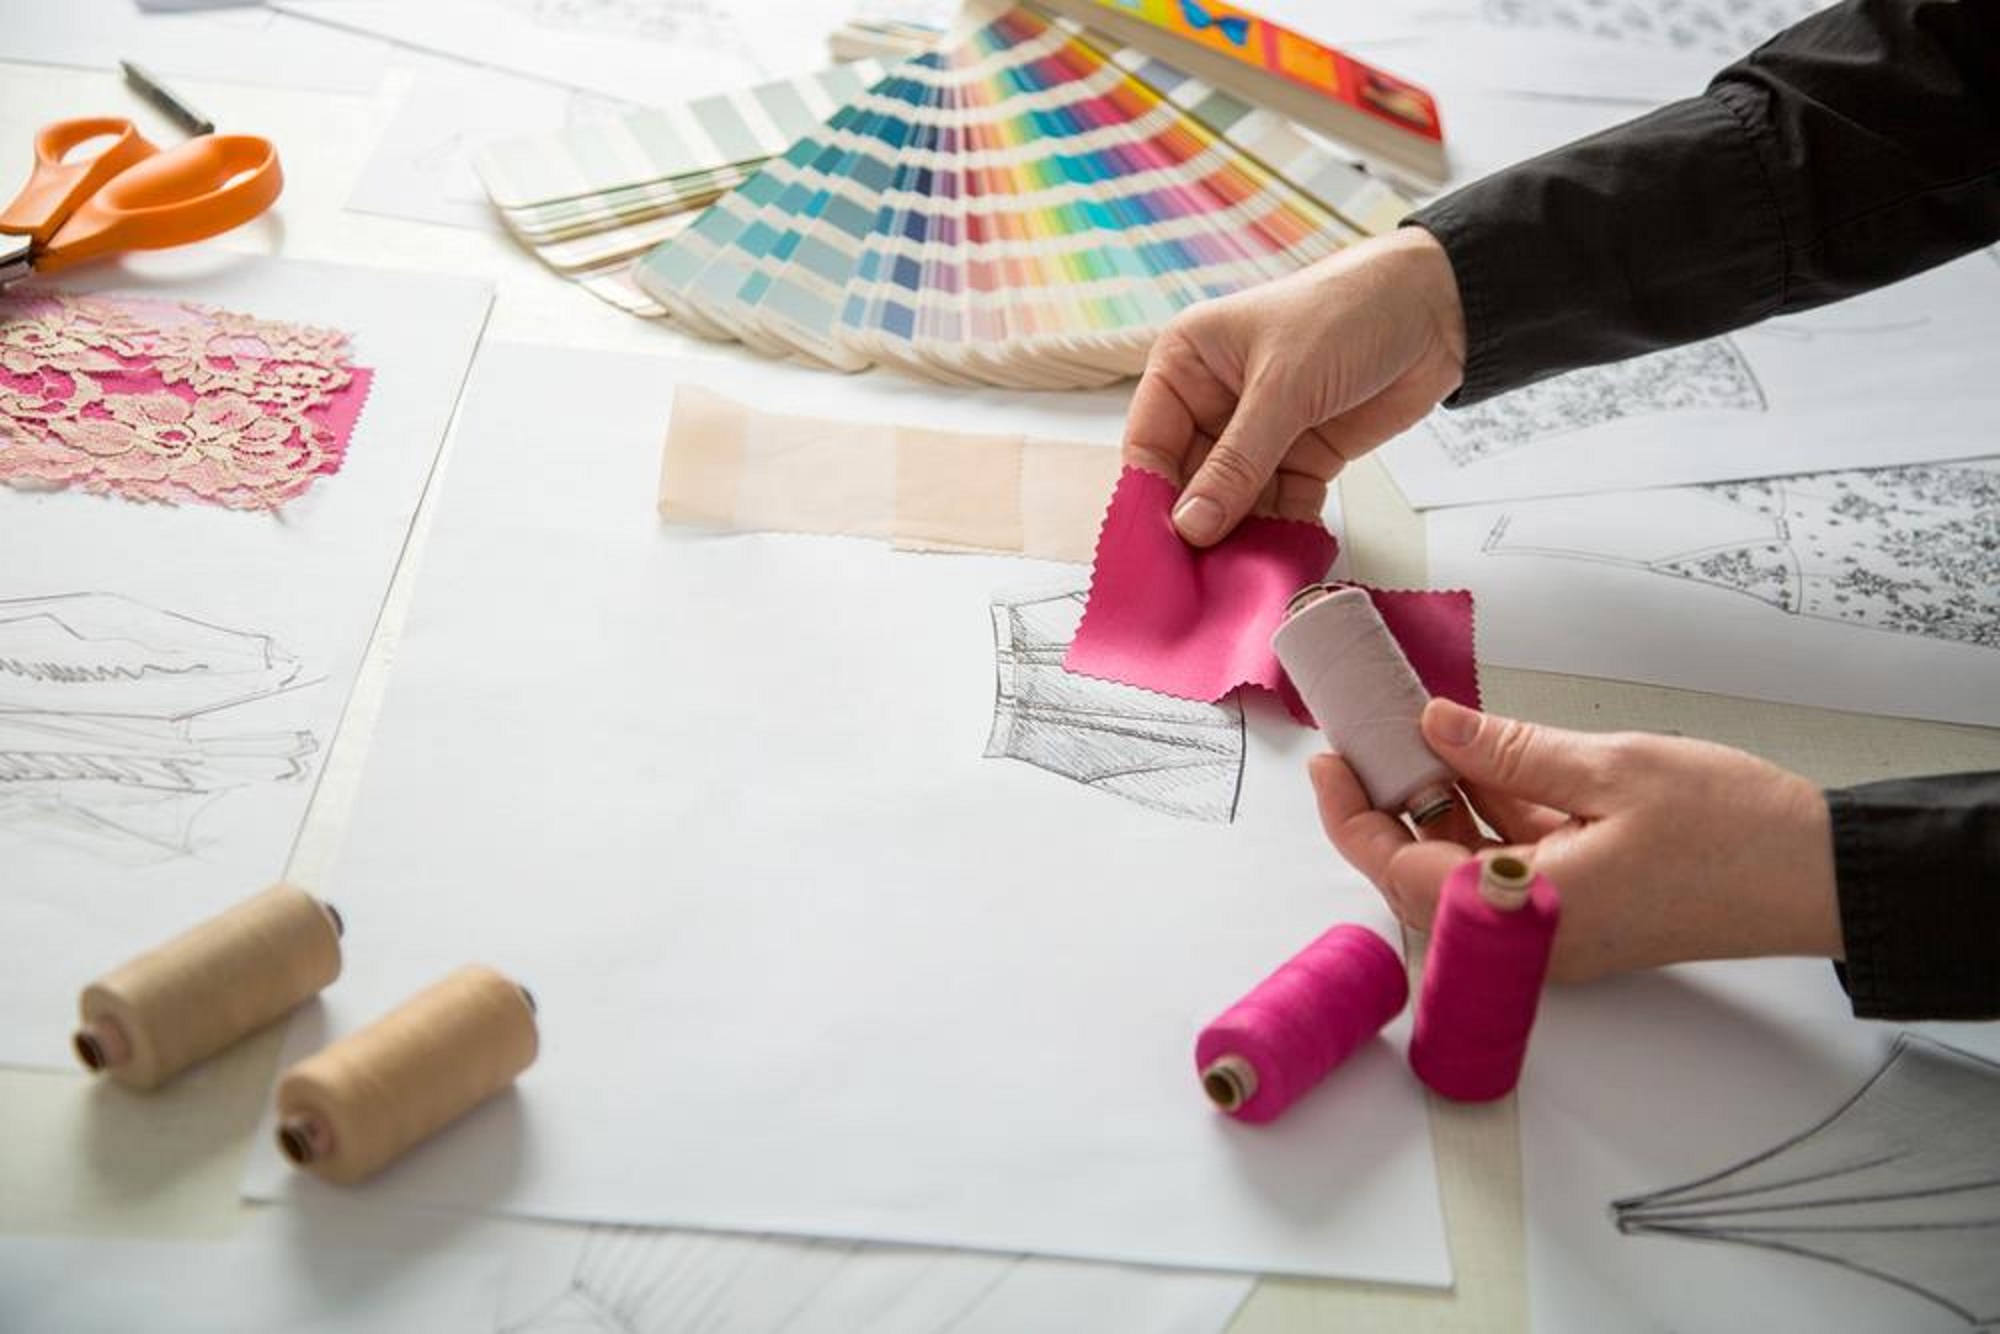 Looking for Fashion Design jobs - In Focus Recruitment